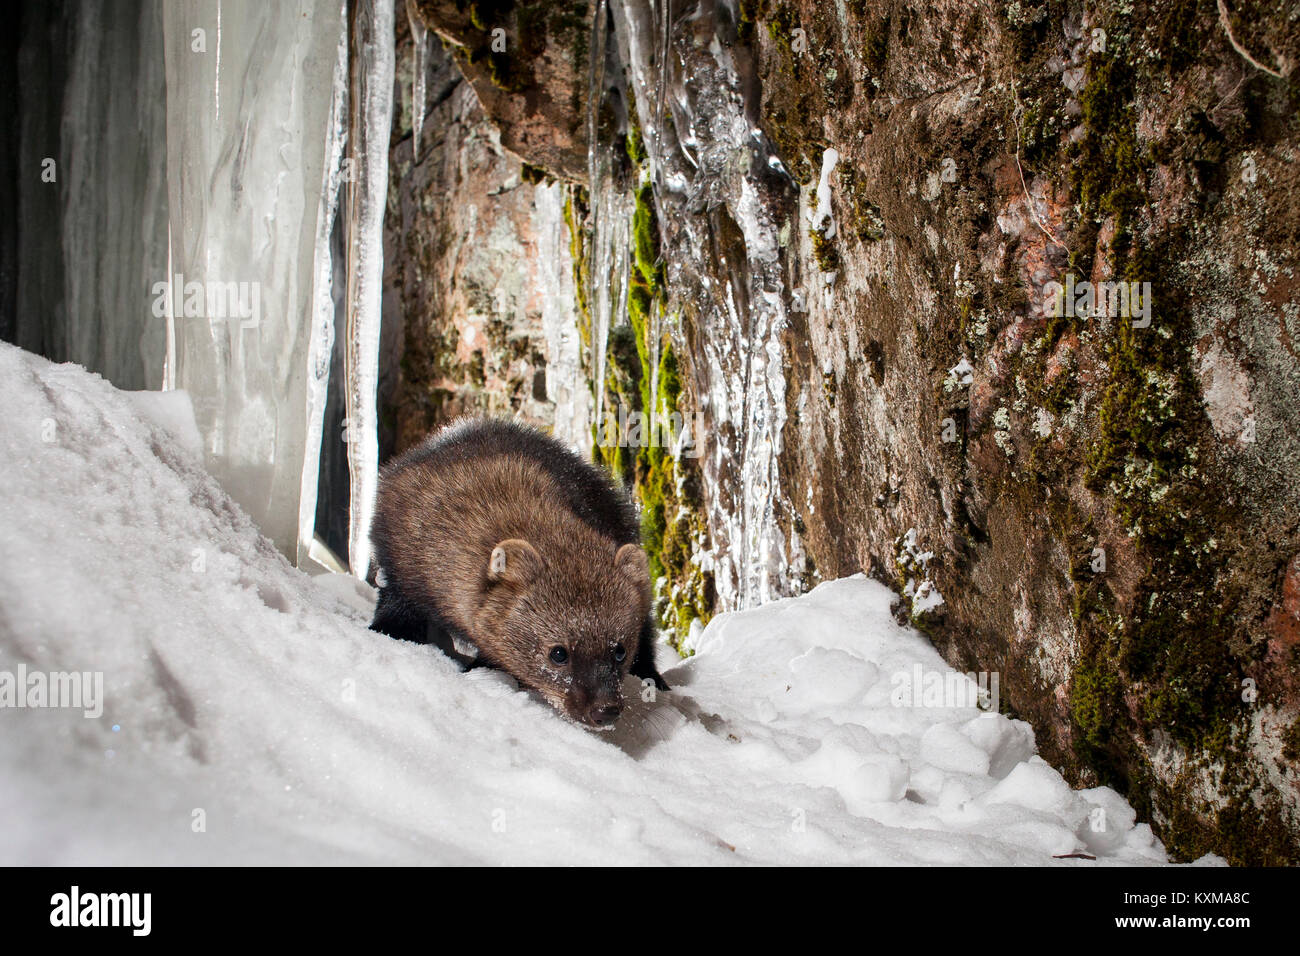 MAYNOOTH, HASTINGS HIGHLANDS, ONTARIO, CANADA - January 10, 2018: A fisher (Martes Pennanti), part of the weasel family / Mustelidae forages for food. Stock Photo